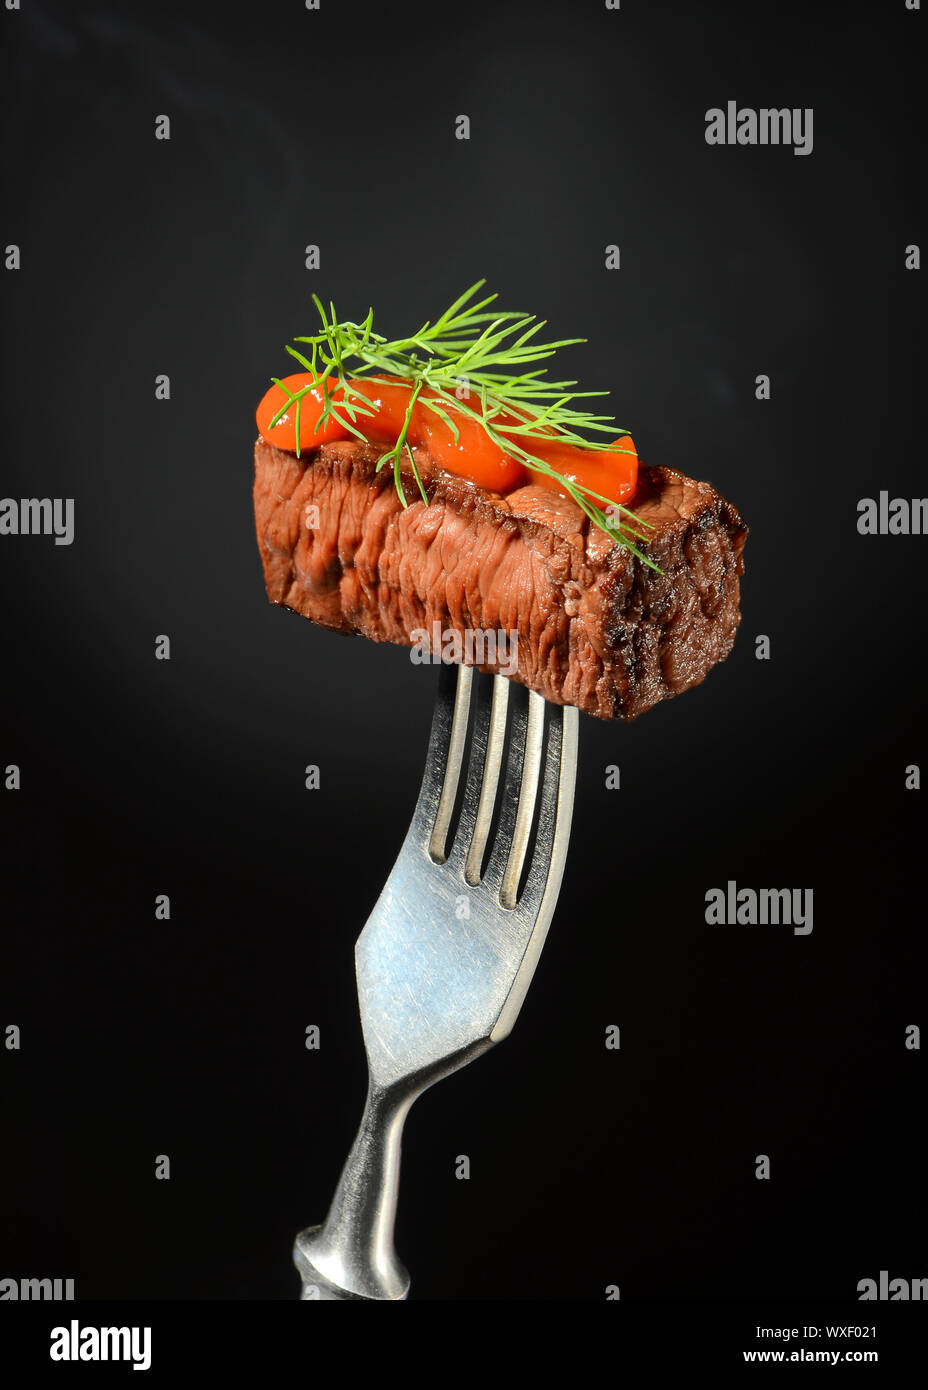 A juicy piece of meat with ketchup and dill is planted on a fork on a dark background with smoke. Stock Photo